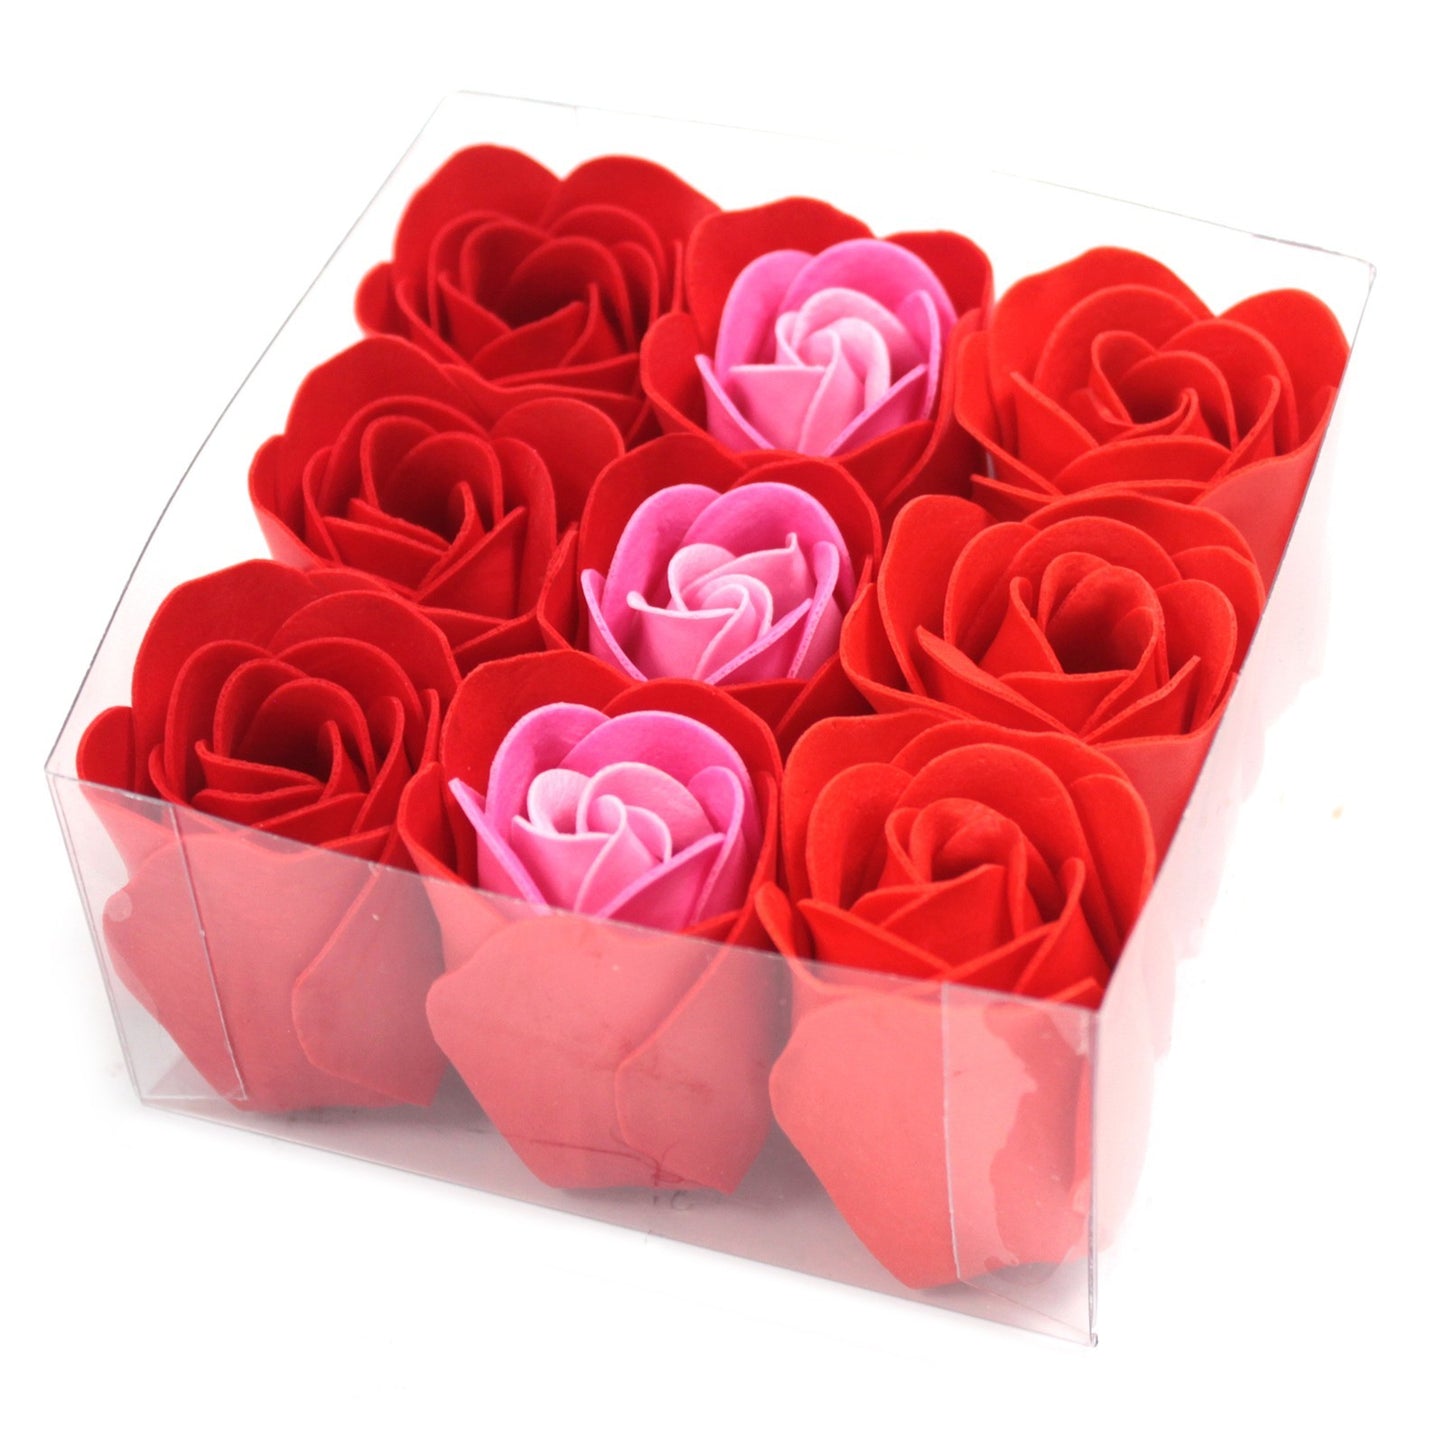 Set of 9 Soap Flowers - Red Roses